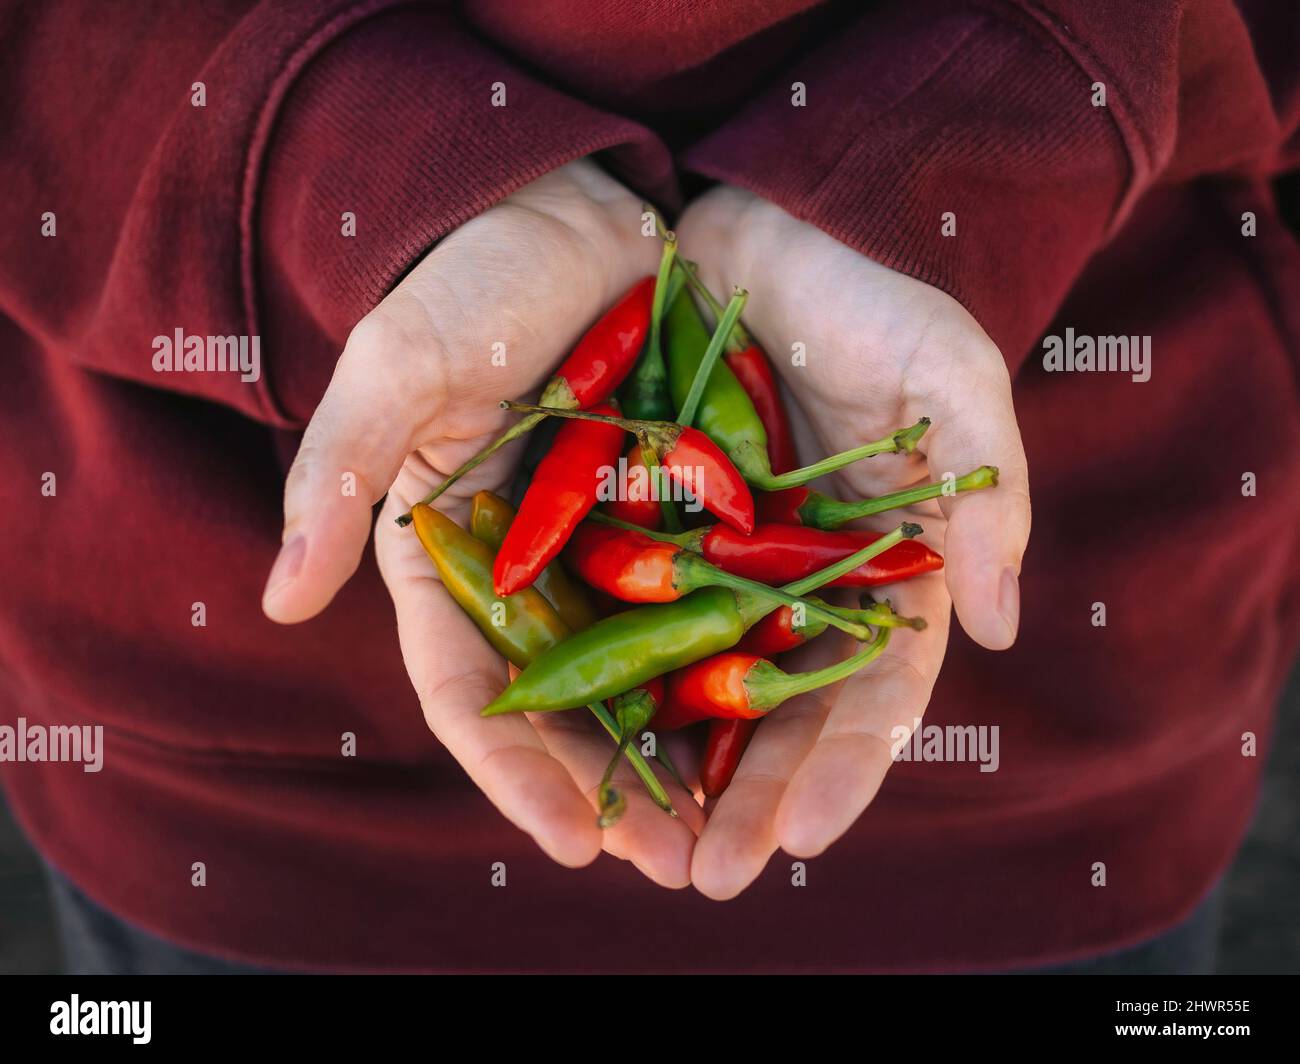 Woman with hands cupped holding fresh red and green chilies Stock Photo